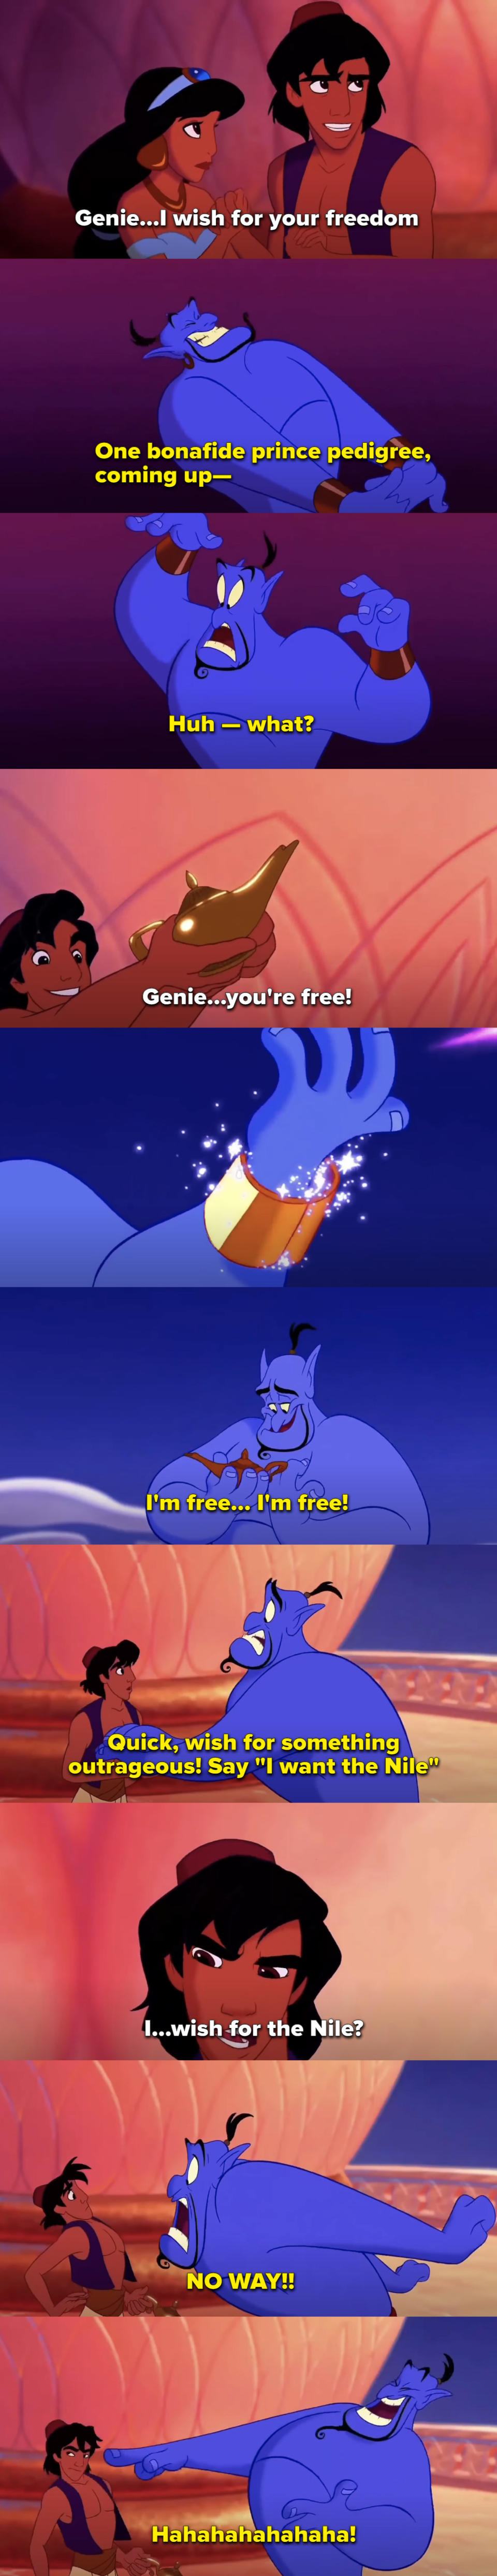 The scene at the end of Aladdin where the Genie is freed